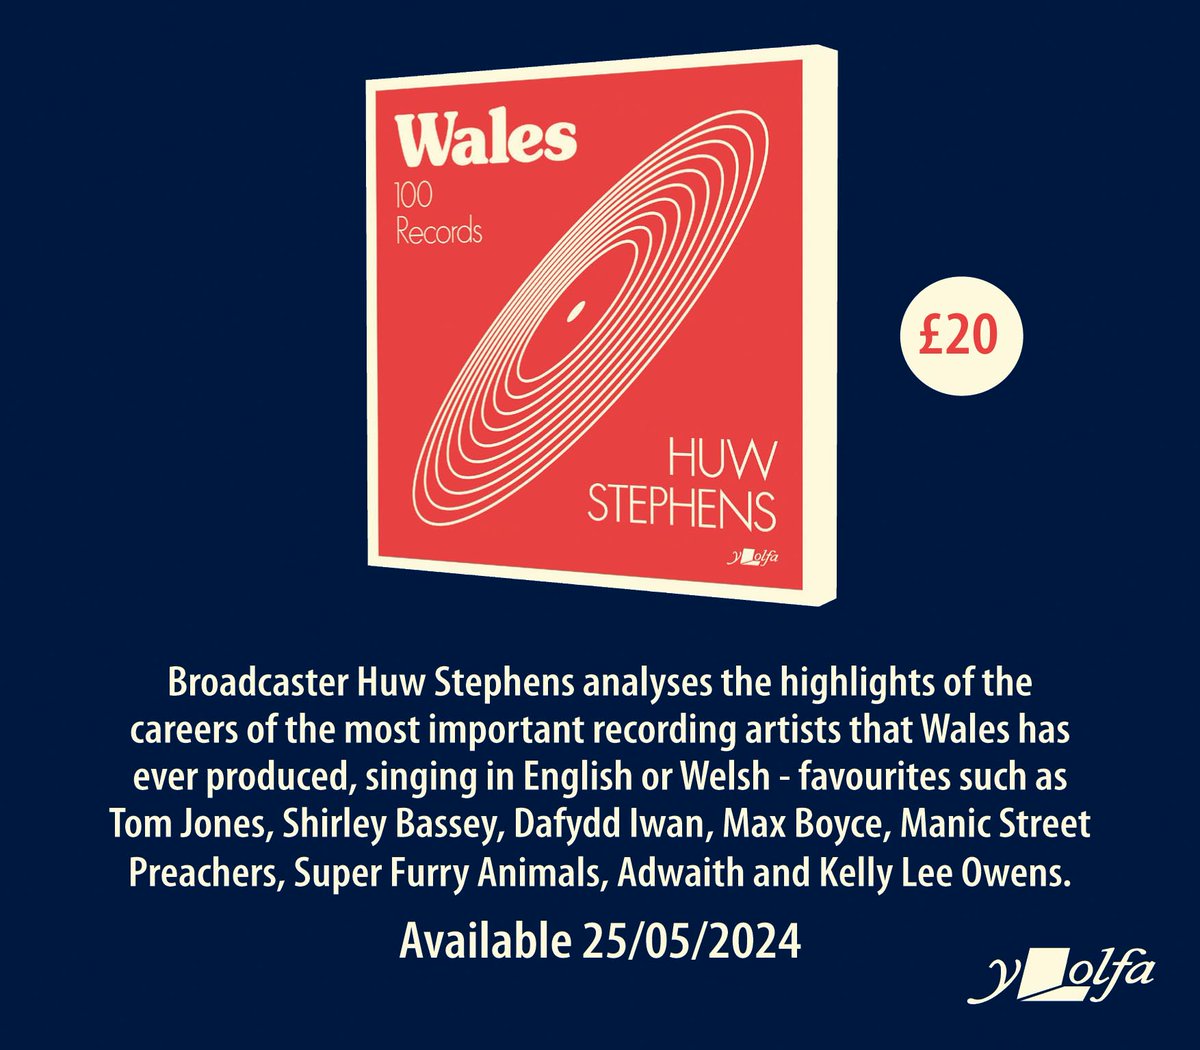 Available next week! Huw Stephens brings us his selection of 100 records by Welsh artists, looking at significant releases in genres from folk to punk to hip-hop, and at records in both English and Welsh. Price: £20 @Books_Wales @huwstephens